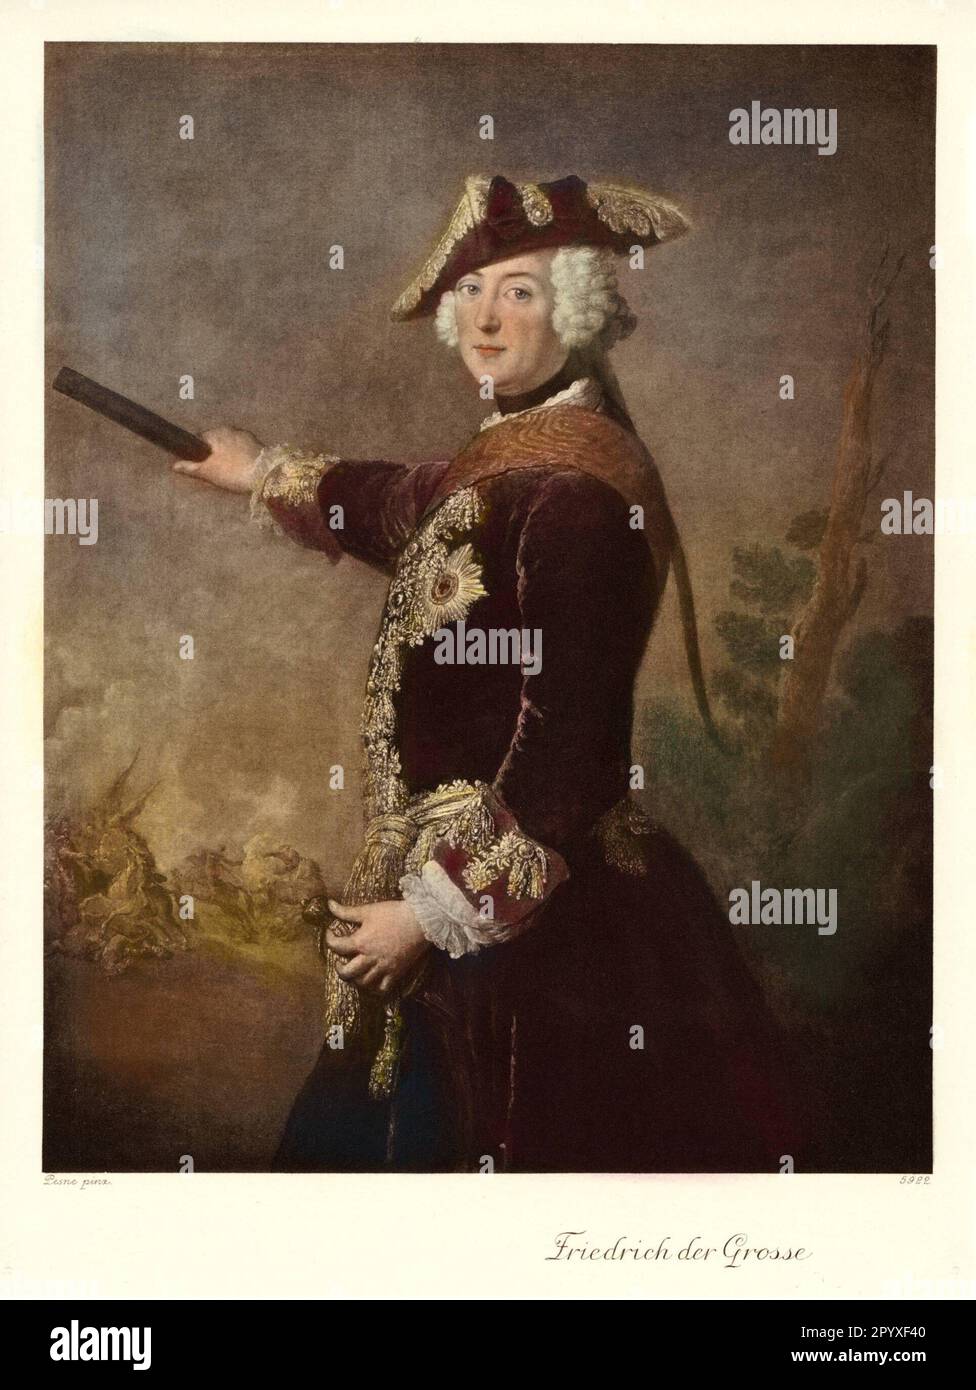 Frederick II, also called Frederick the Great (1712-1786), King of Prussia. The painting shows Frederick II in front of a battle scene in the Silesian War (1740-42). Painting by Antoine Pesne. Photo: Heliogravure, Corpus Imaginum, Hanfstaengl Collection. [automated translation] Stock Photo